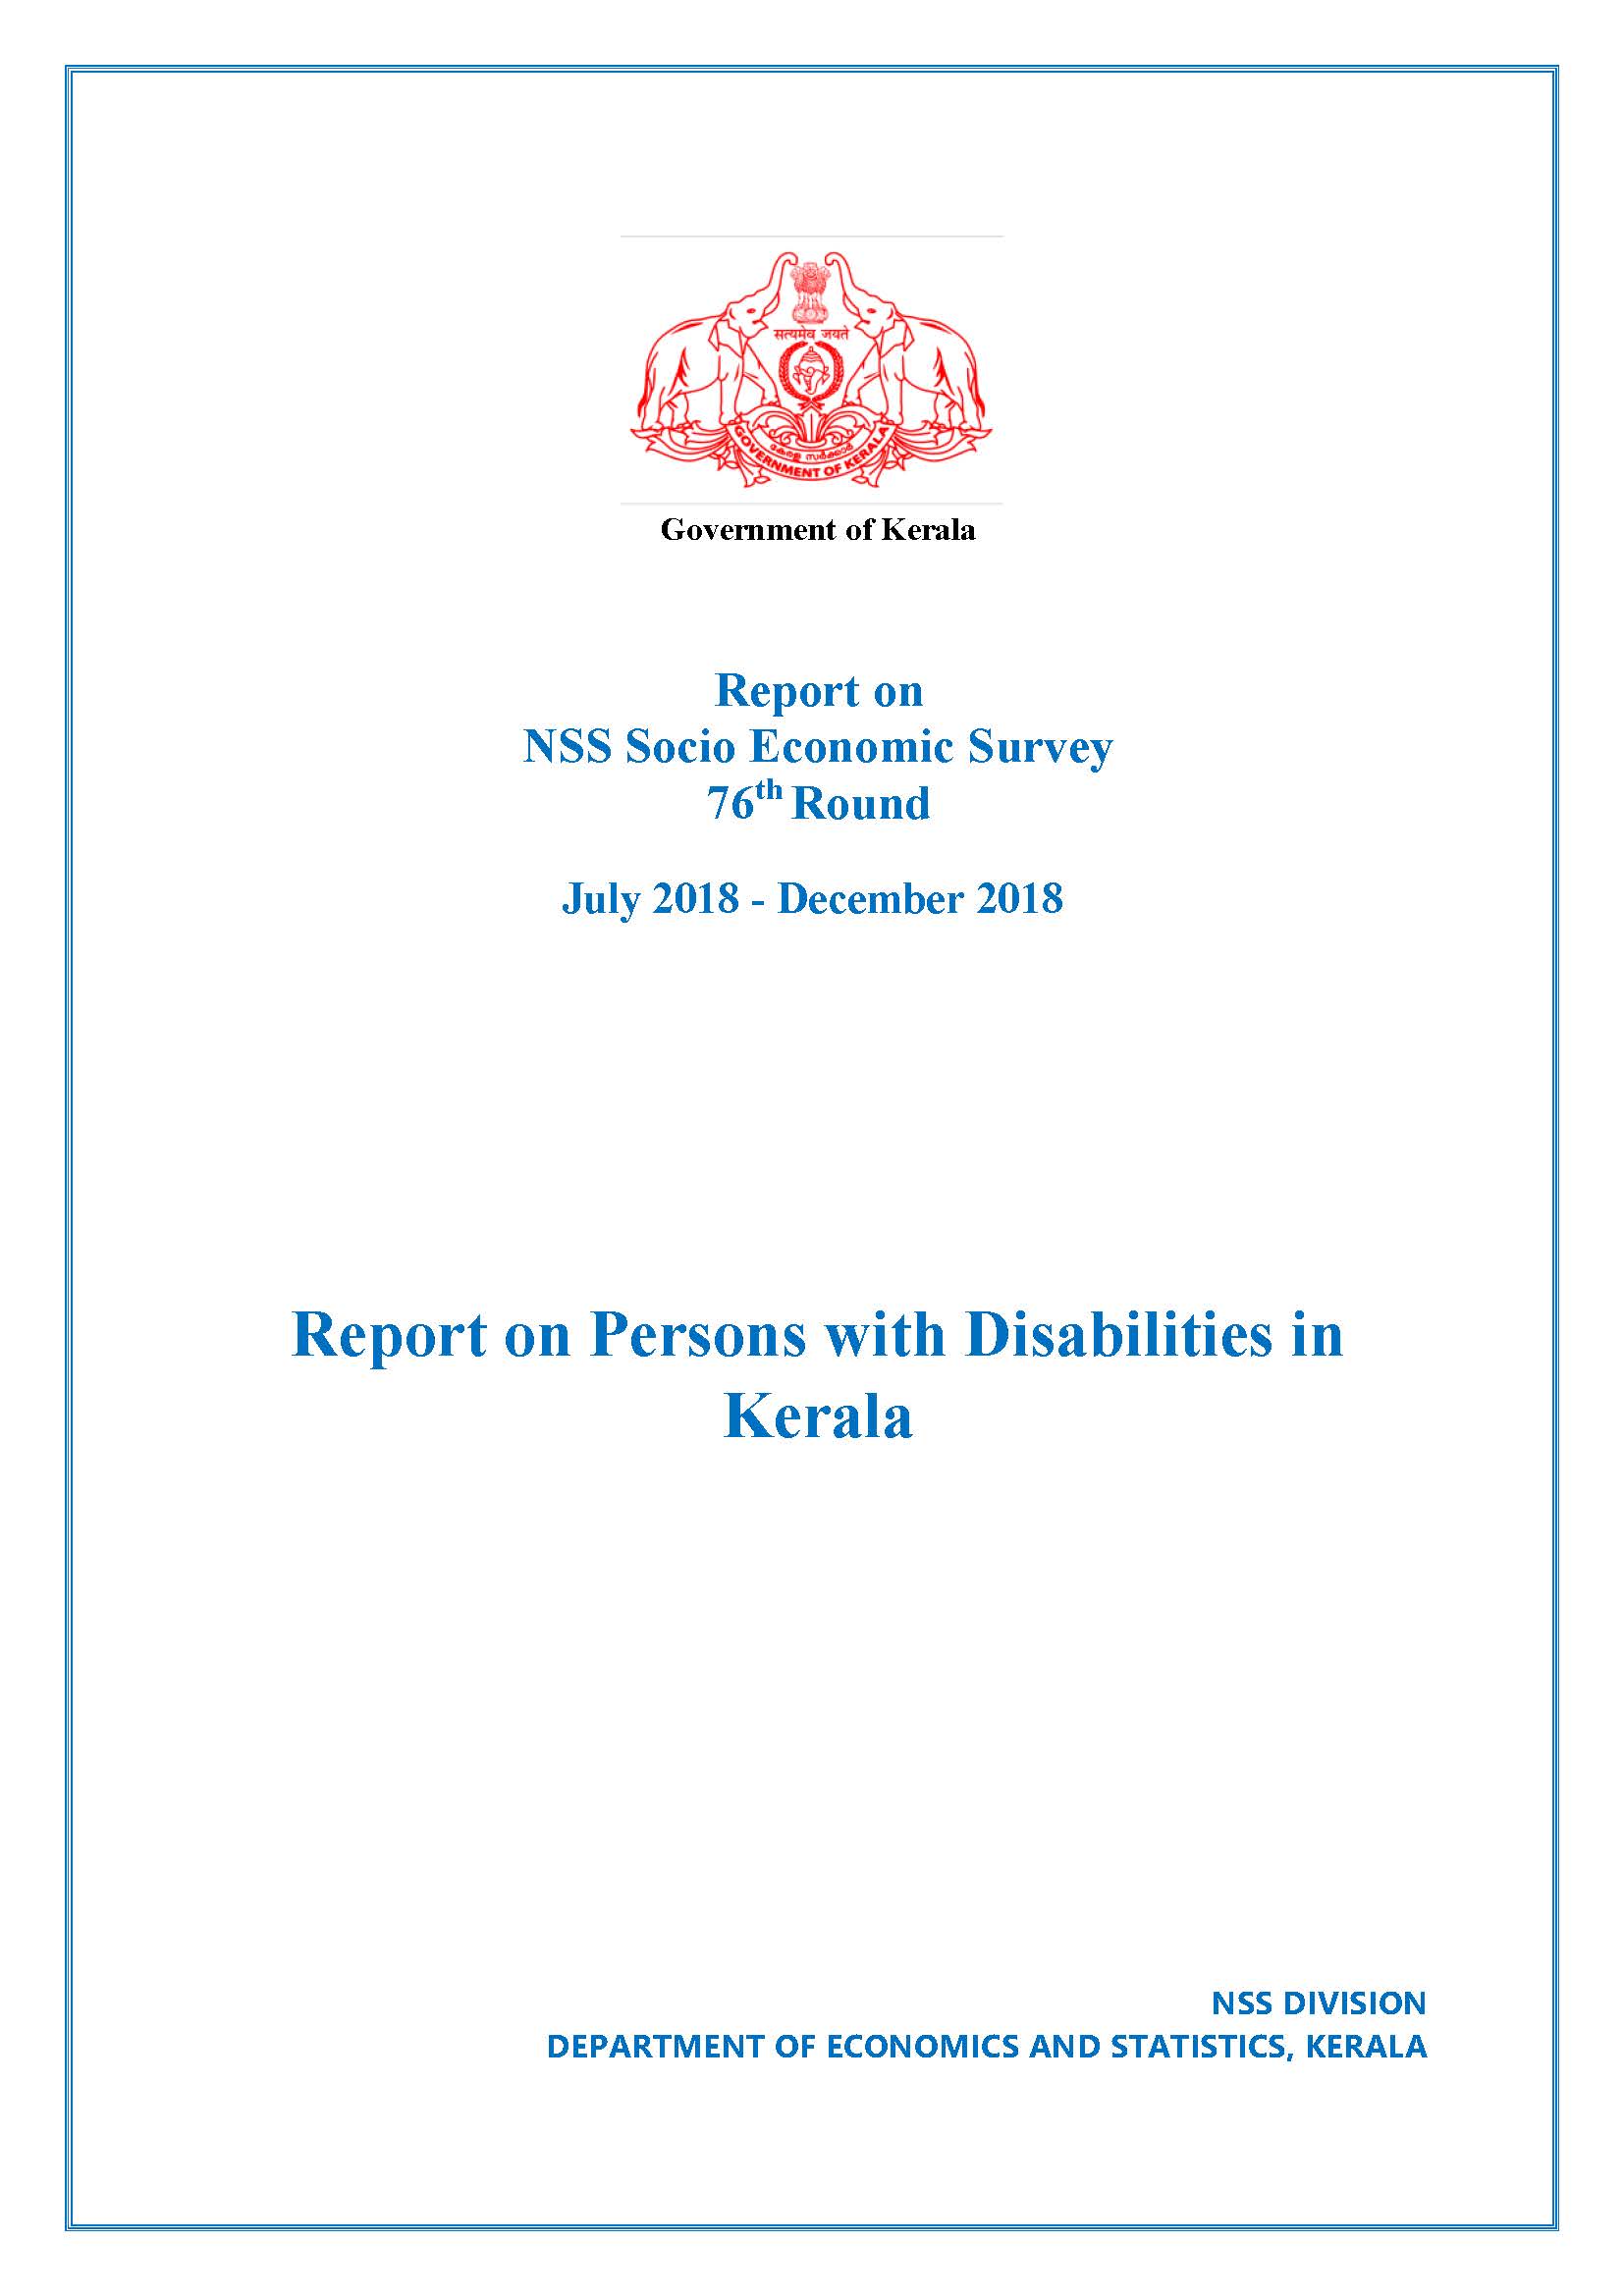 NSS 76th round - Report on NSS Socio Economic Survey - Report on Persons with Disabilities in Kerala